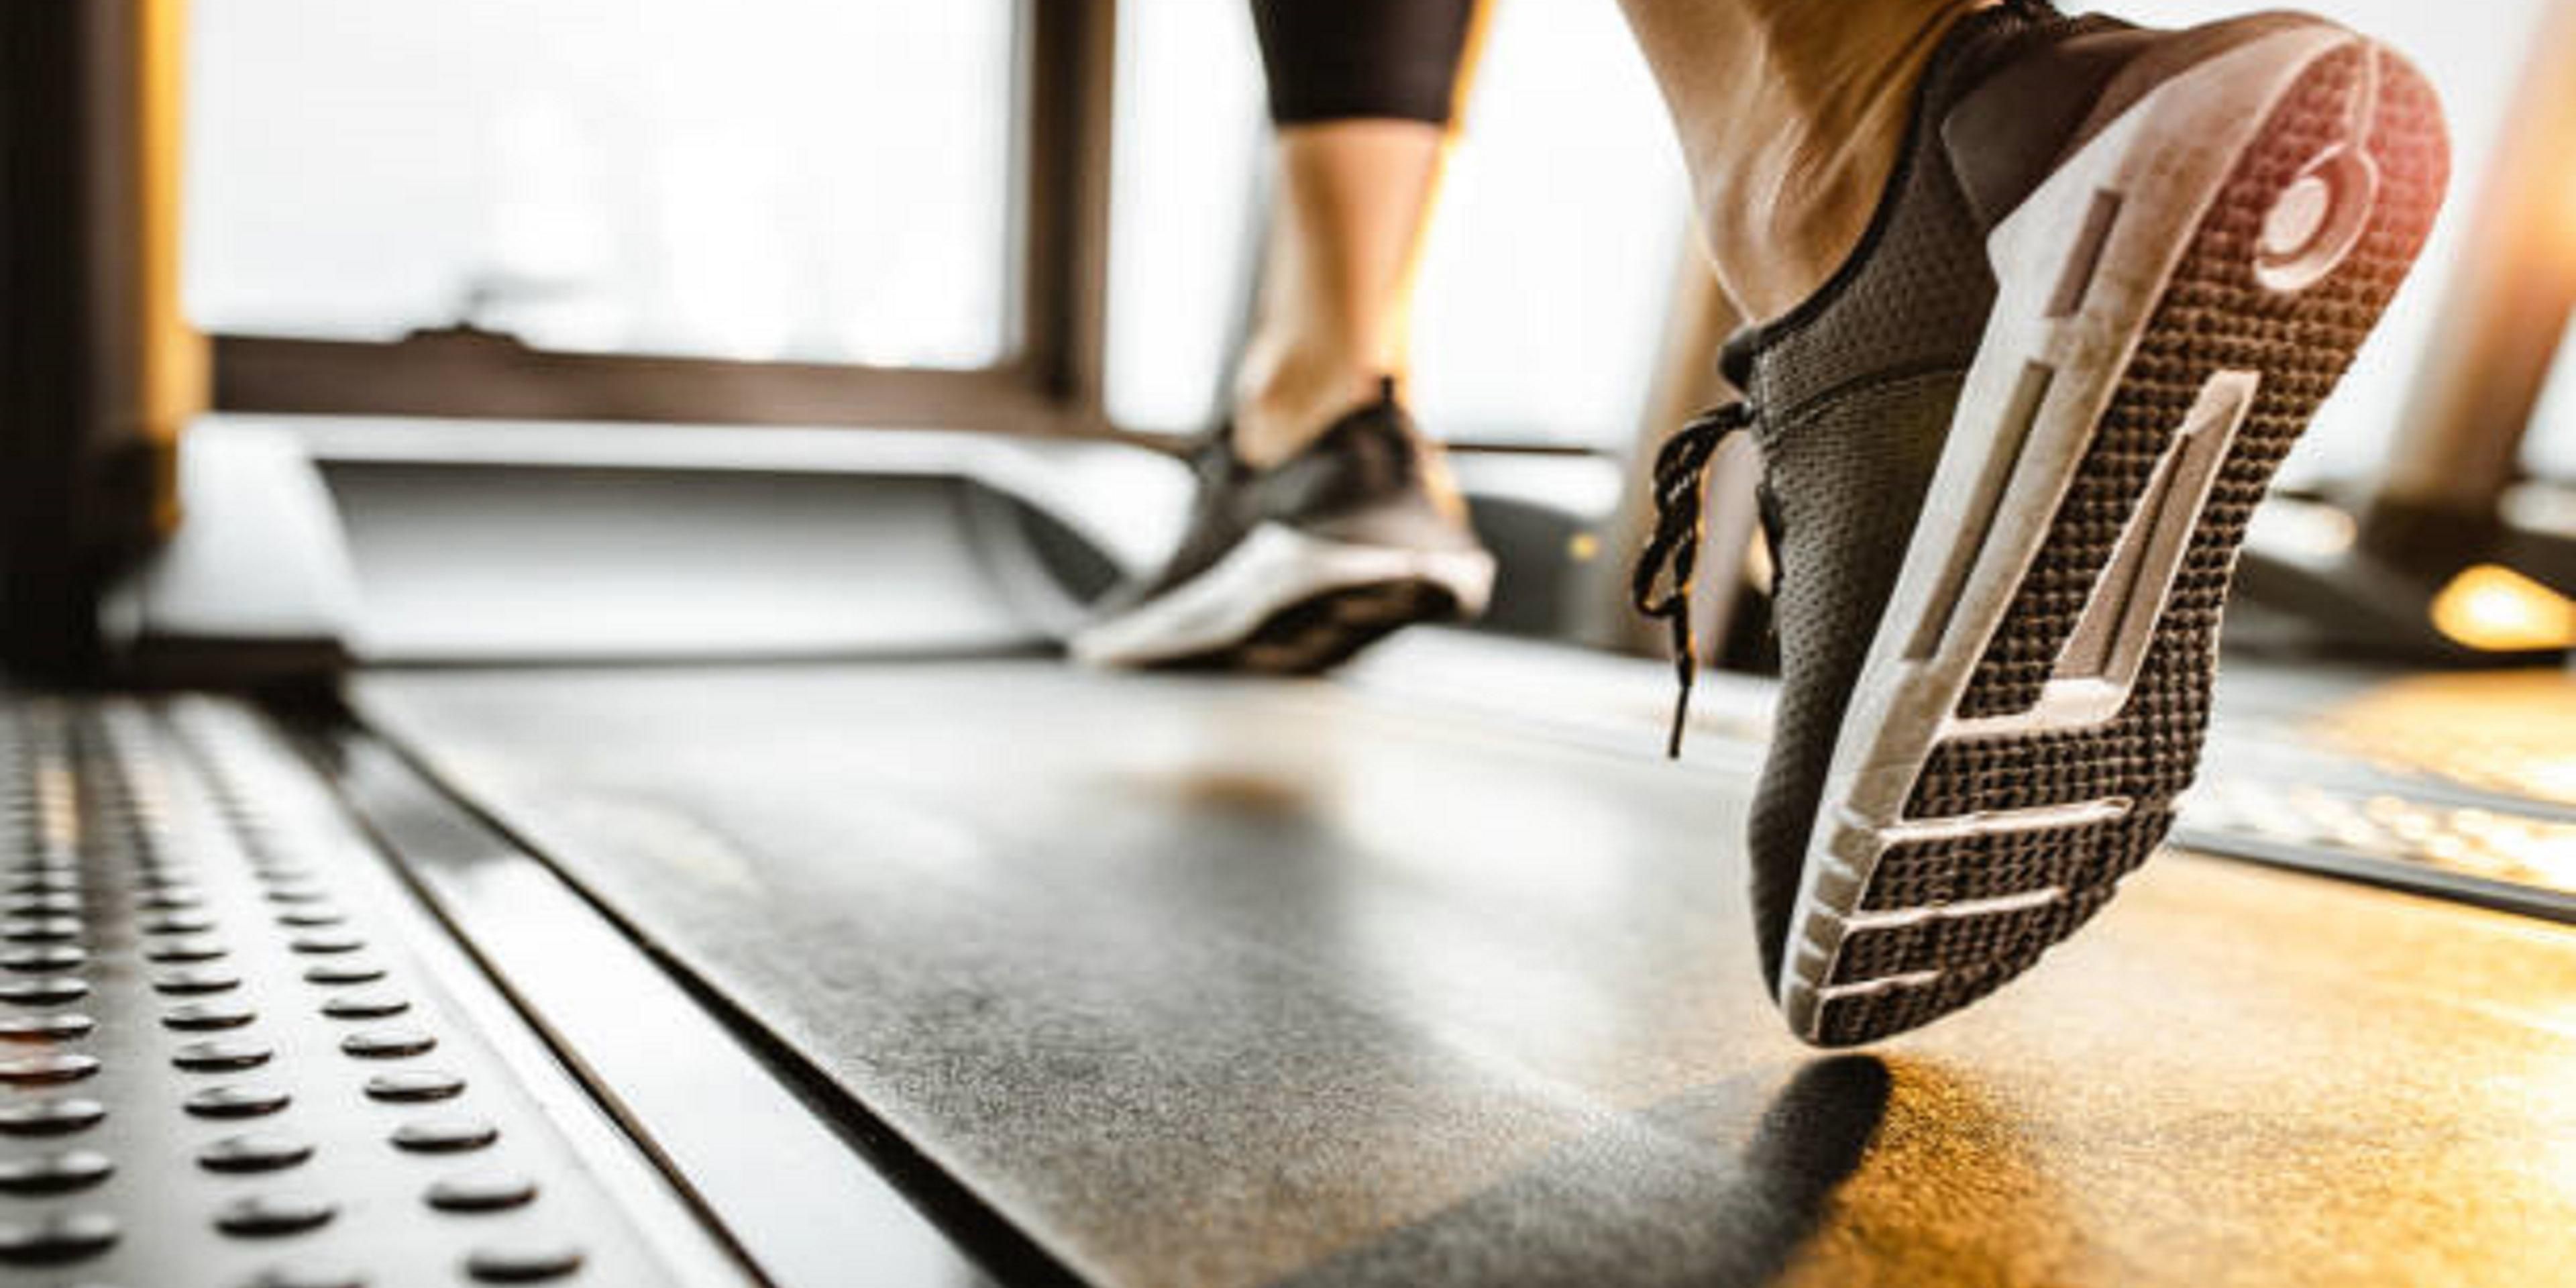 Get your sweat on in our complimentary, fully equipped fitness center with elliptical, free weights, stationary bikes, and treadmill open from 6am-midnight.